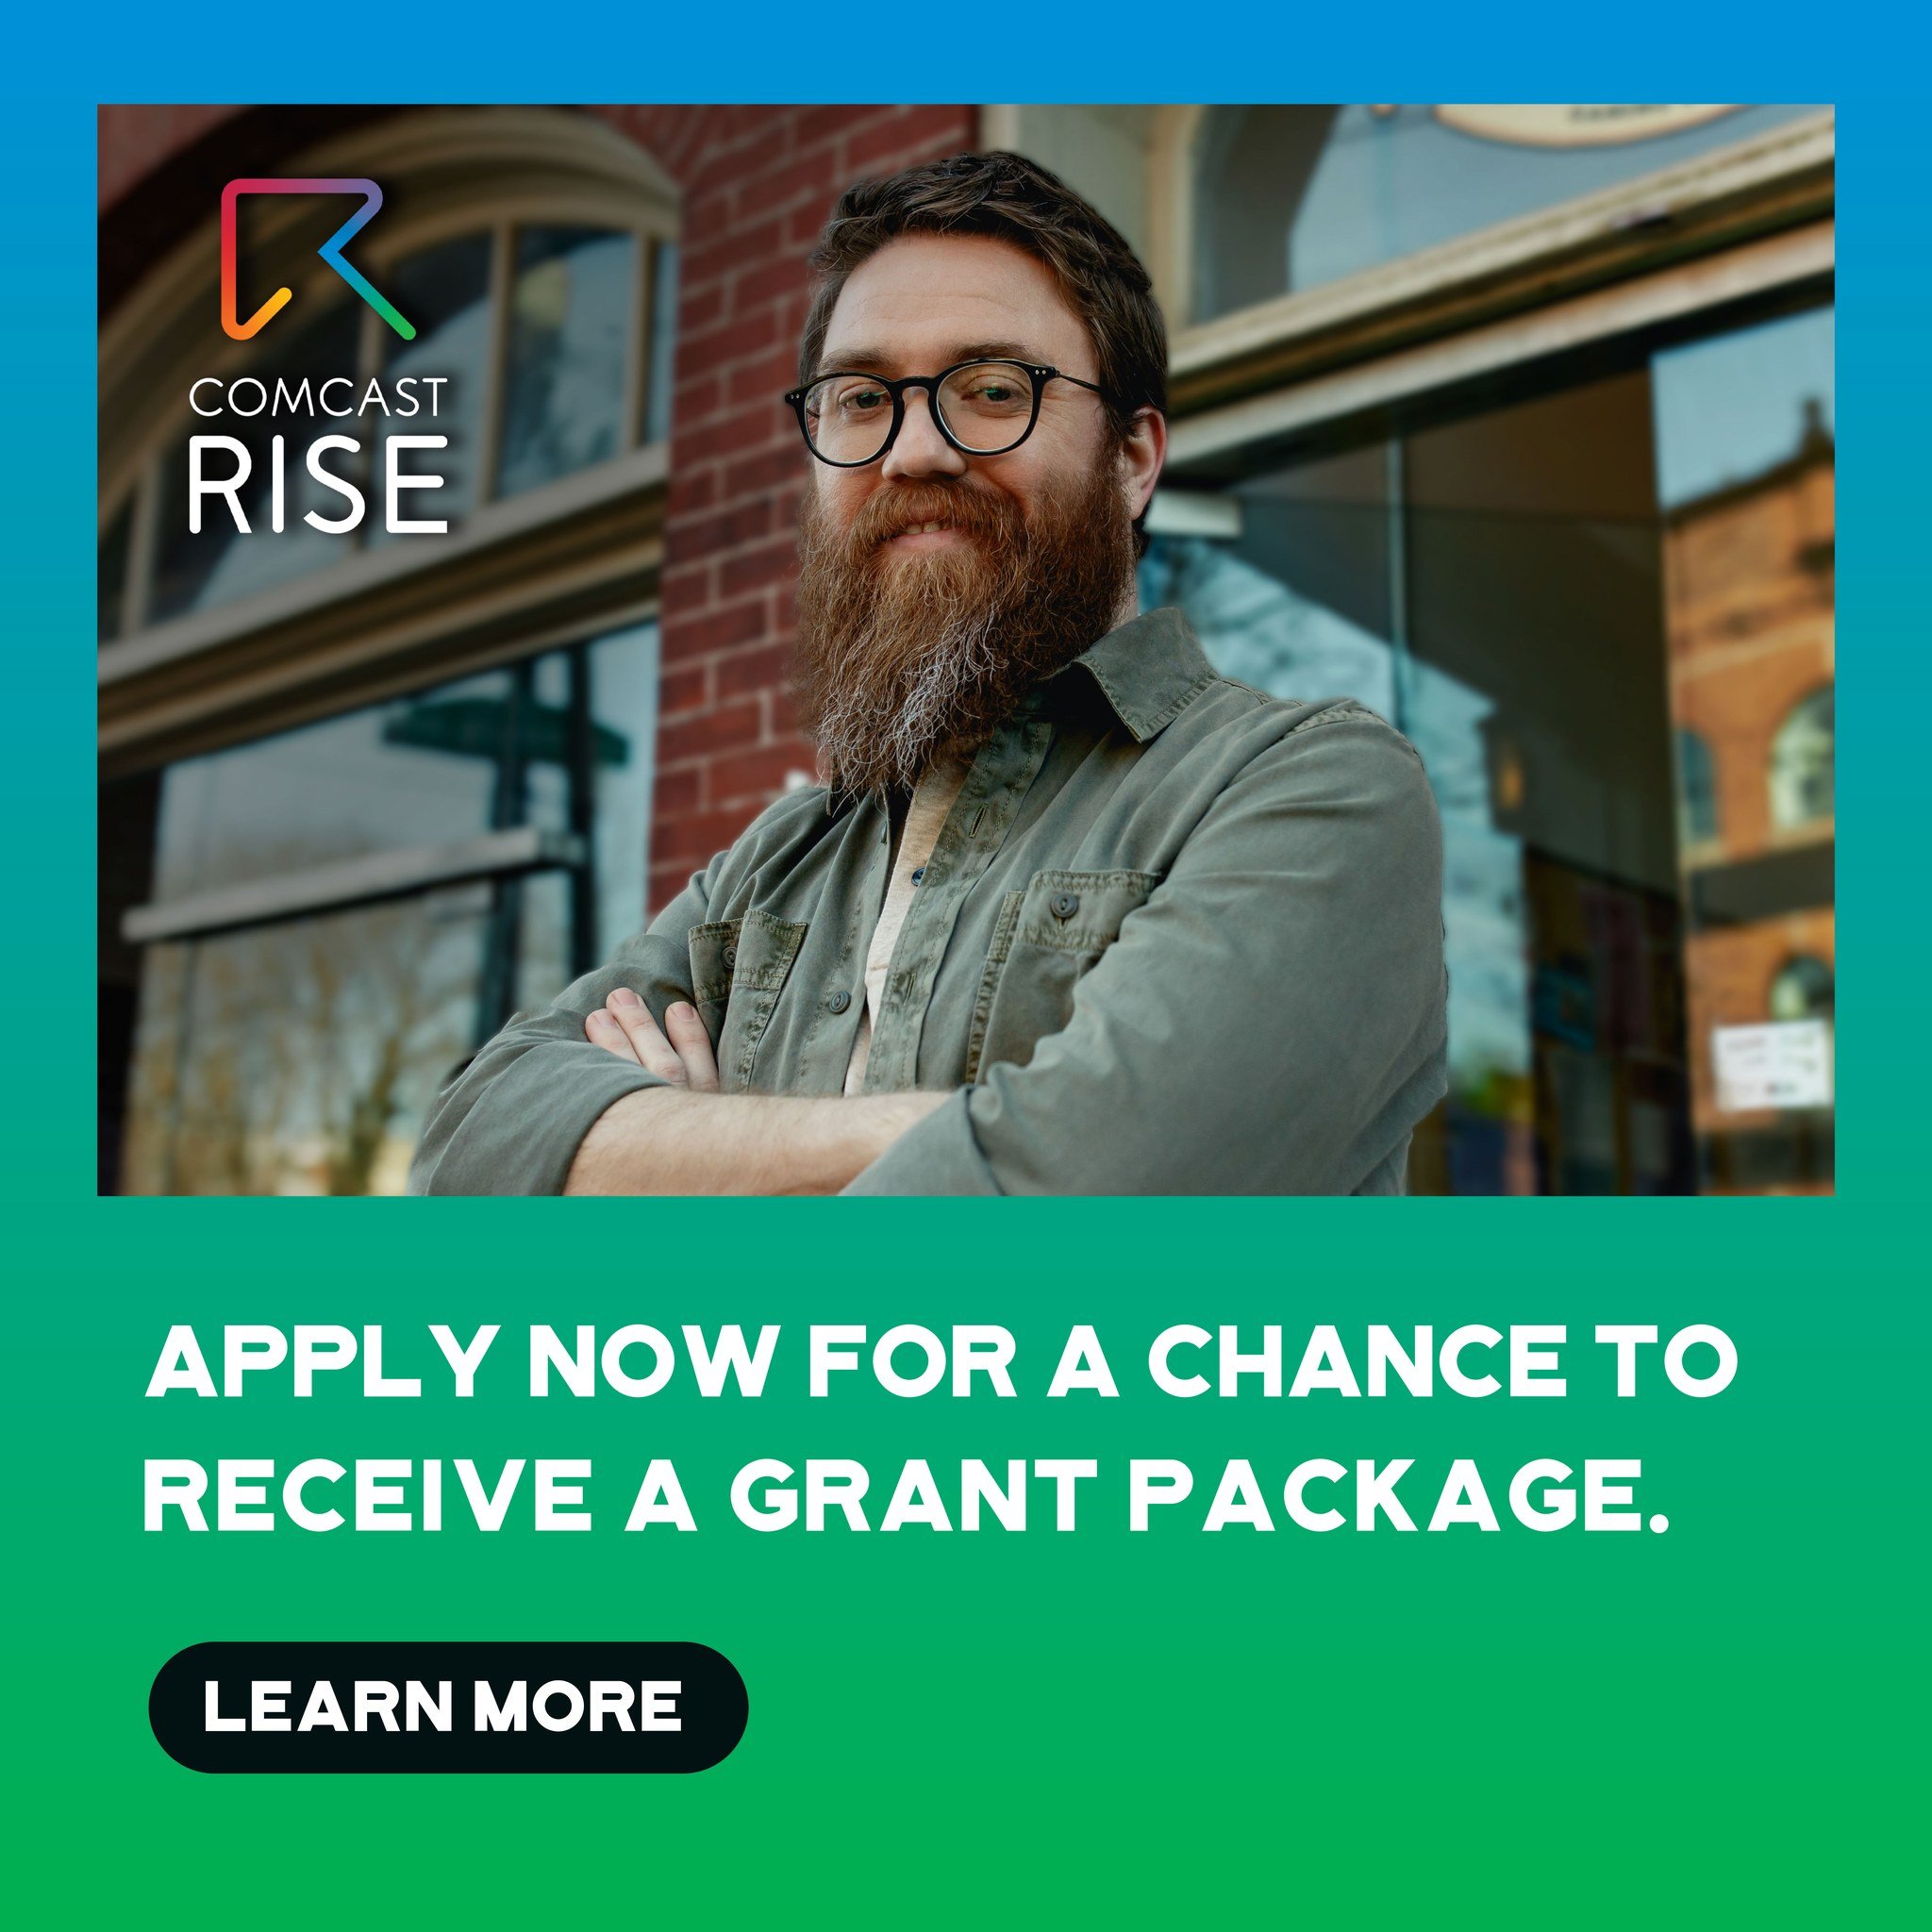 DIVERSITY RICHMOND PARTNERS WITH COMCAST RISE TO SUPPORT SMALL BUSINESSES

Diversity Richmond is teaming up with our friends at Comcast who have been long-time supporters of our work through VA Pride to promote their small business grant program, Com